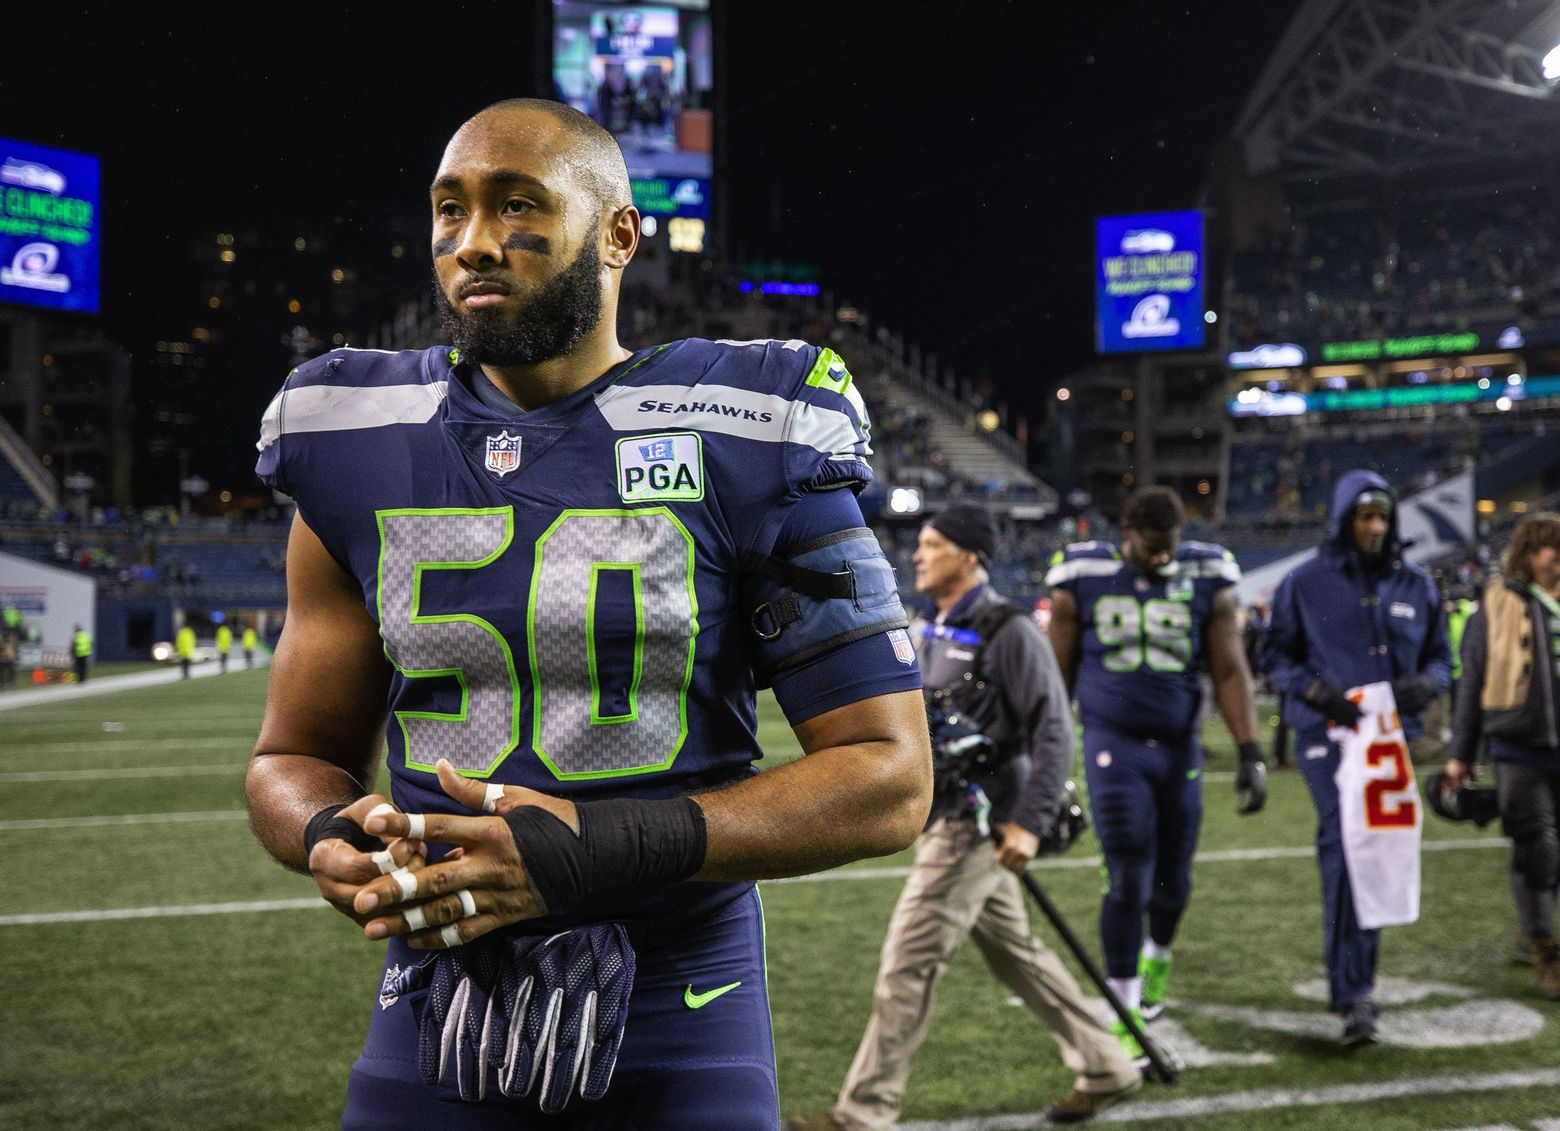 Seahawks' K.J. Wright shows the 